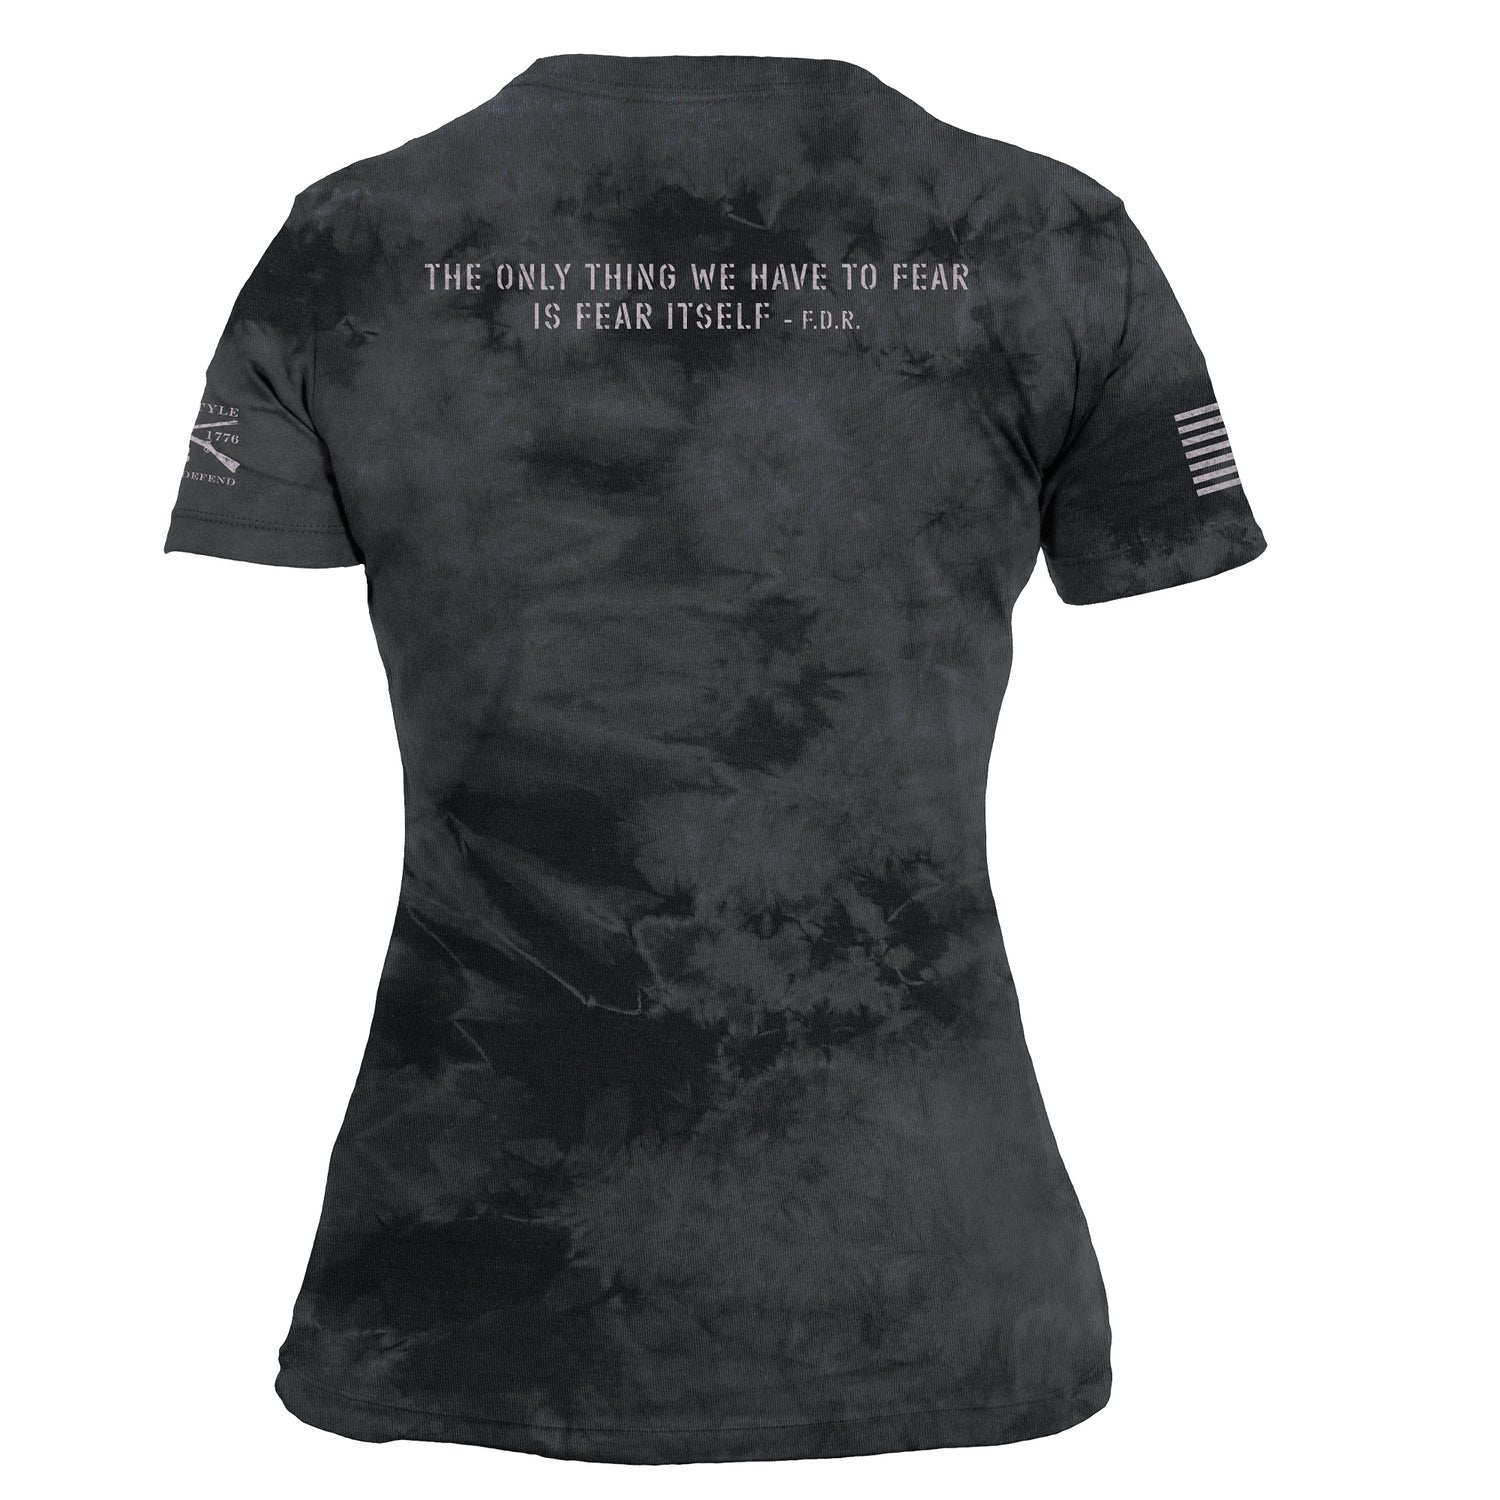 Patriotic Shirts for Women - Fear Less 